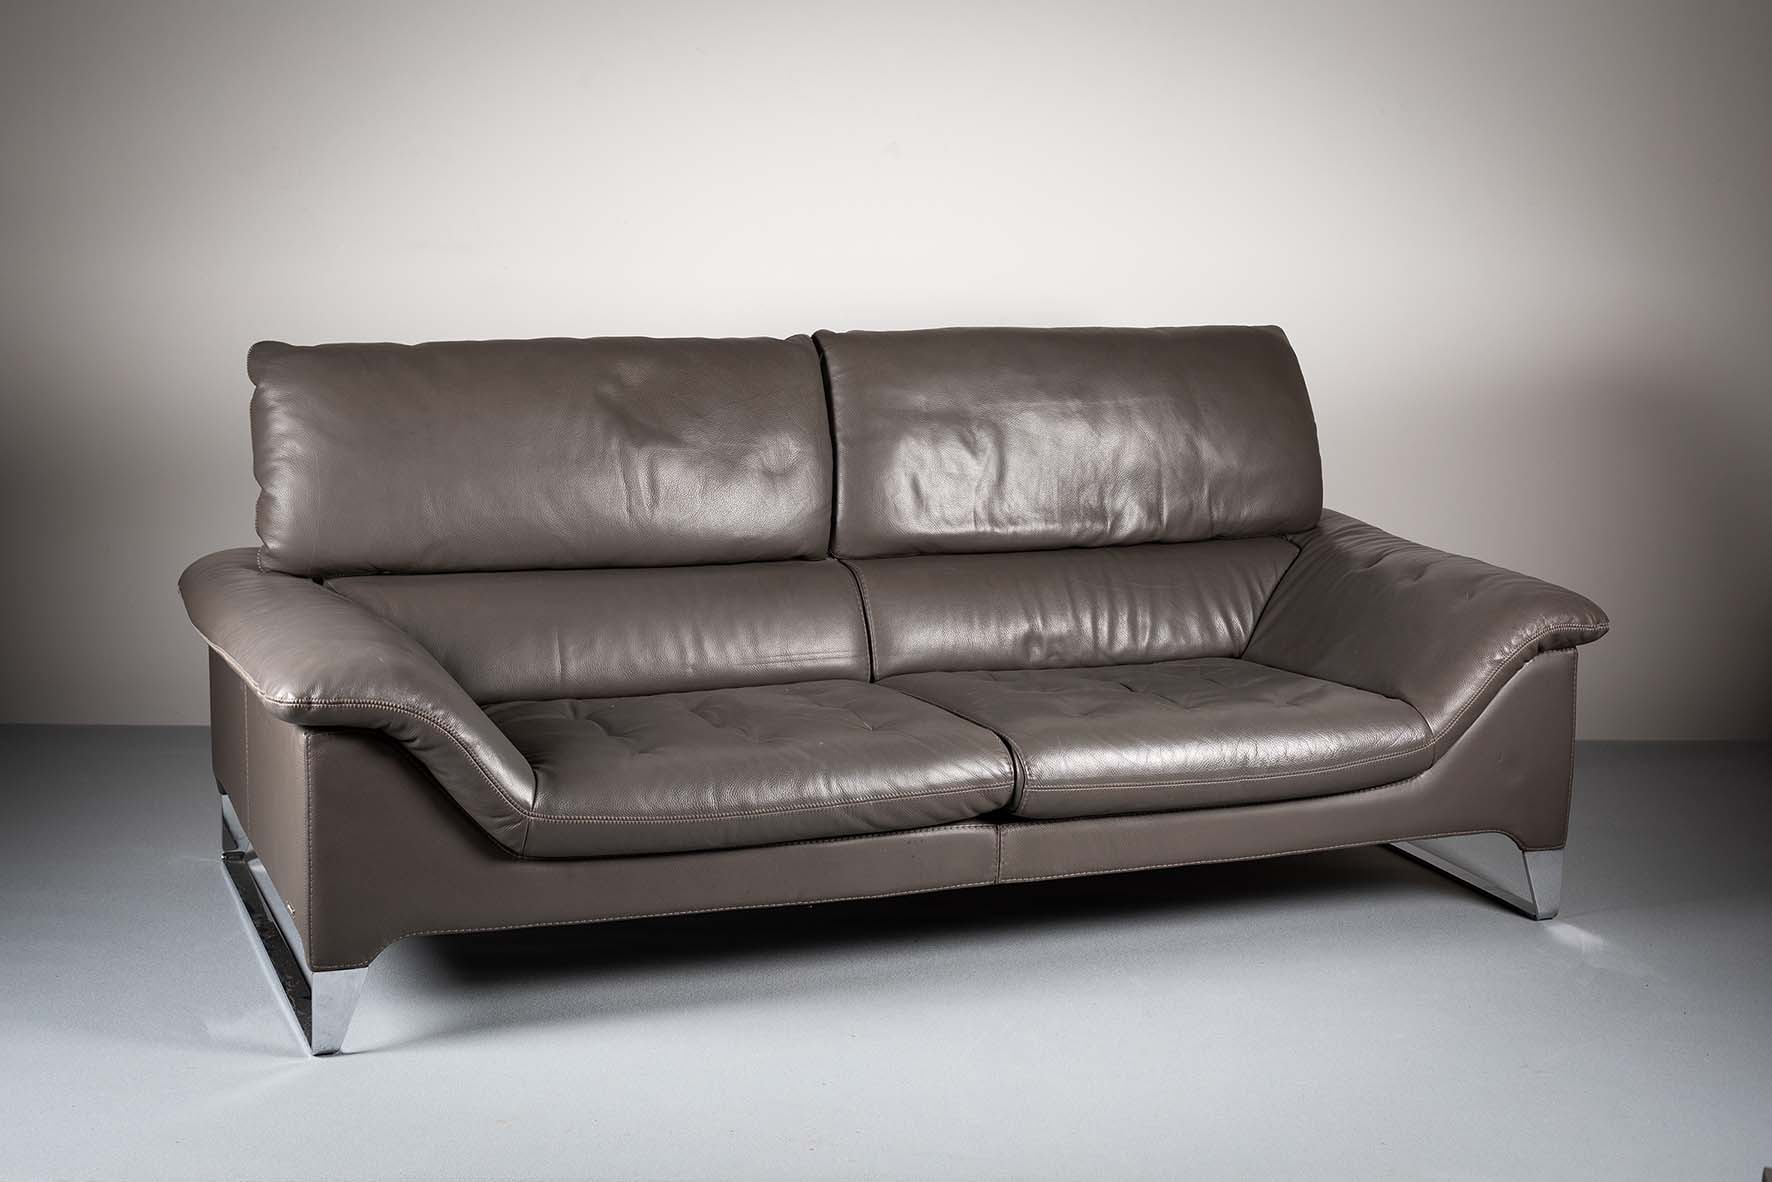 A LEATHER SOFA, by Roche Bobois, with ad - Image 2 of 3